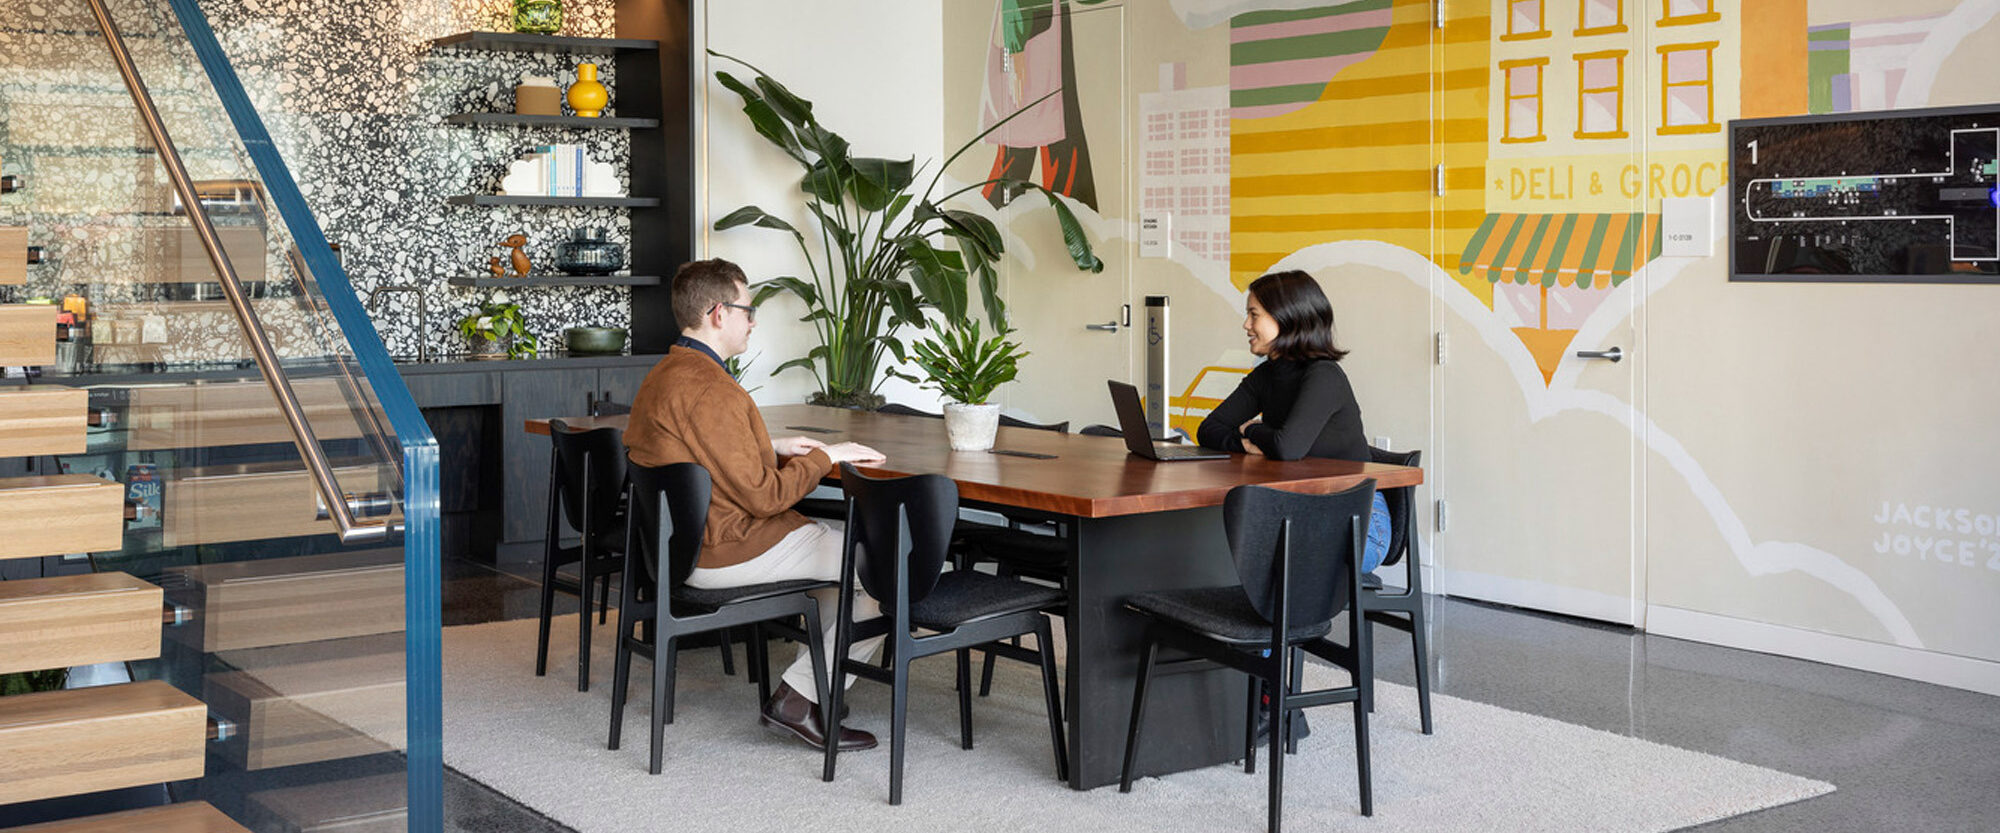 Modern café interior featuring a large vibrant mural with geometric shapes and bicycles, accented by natural wood furniture and a sleek black staircase leading to an elevated area. Two patrons engage in conversation at a central table.